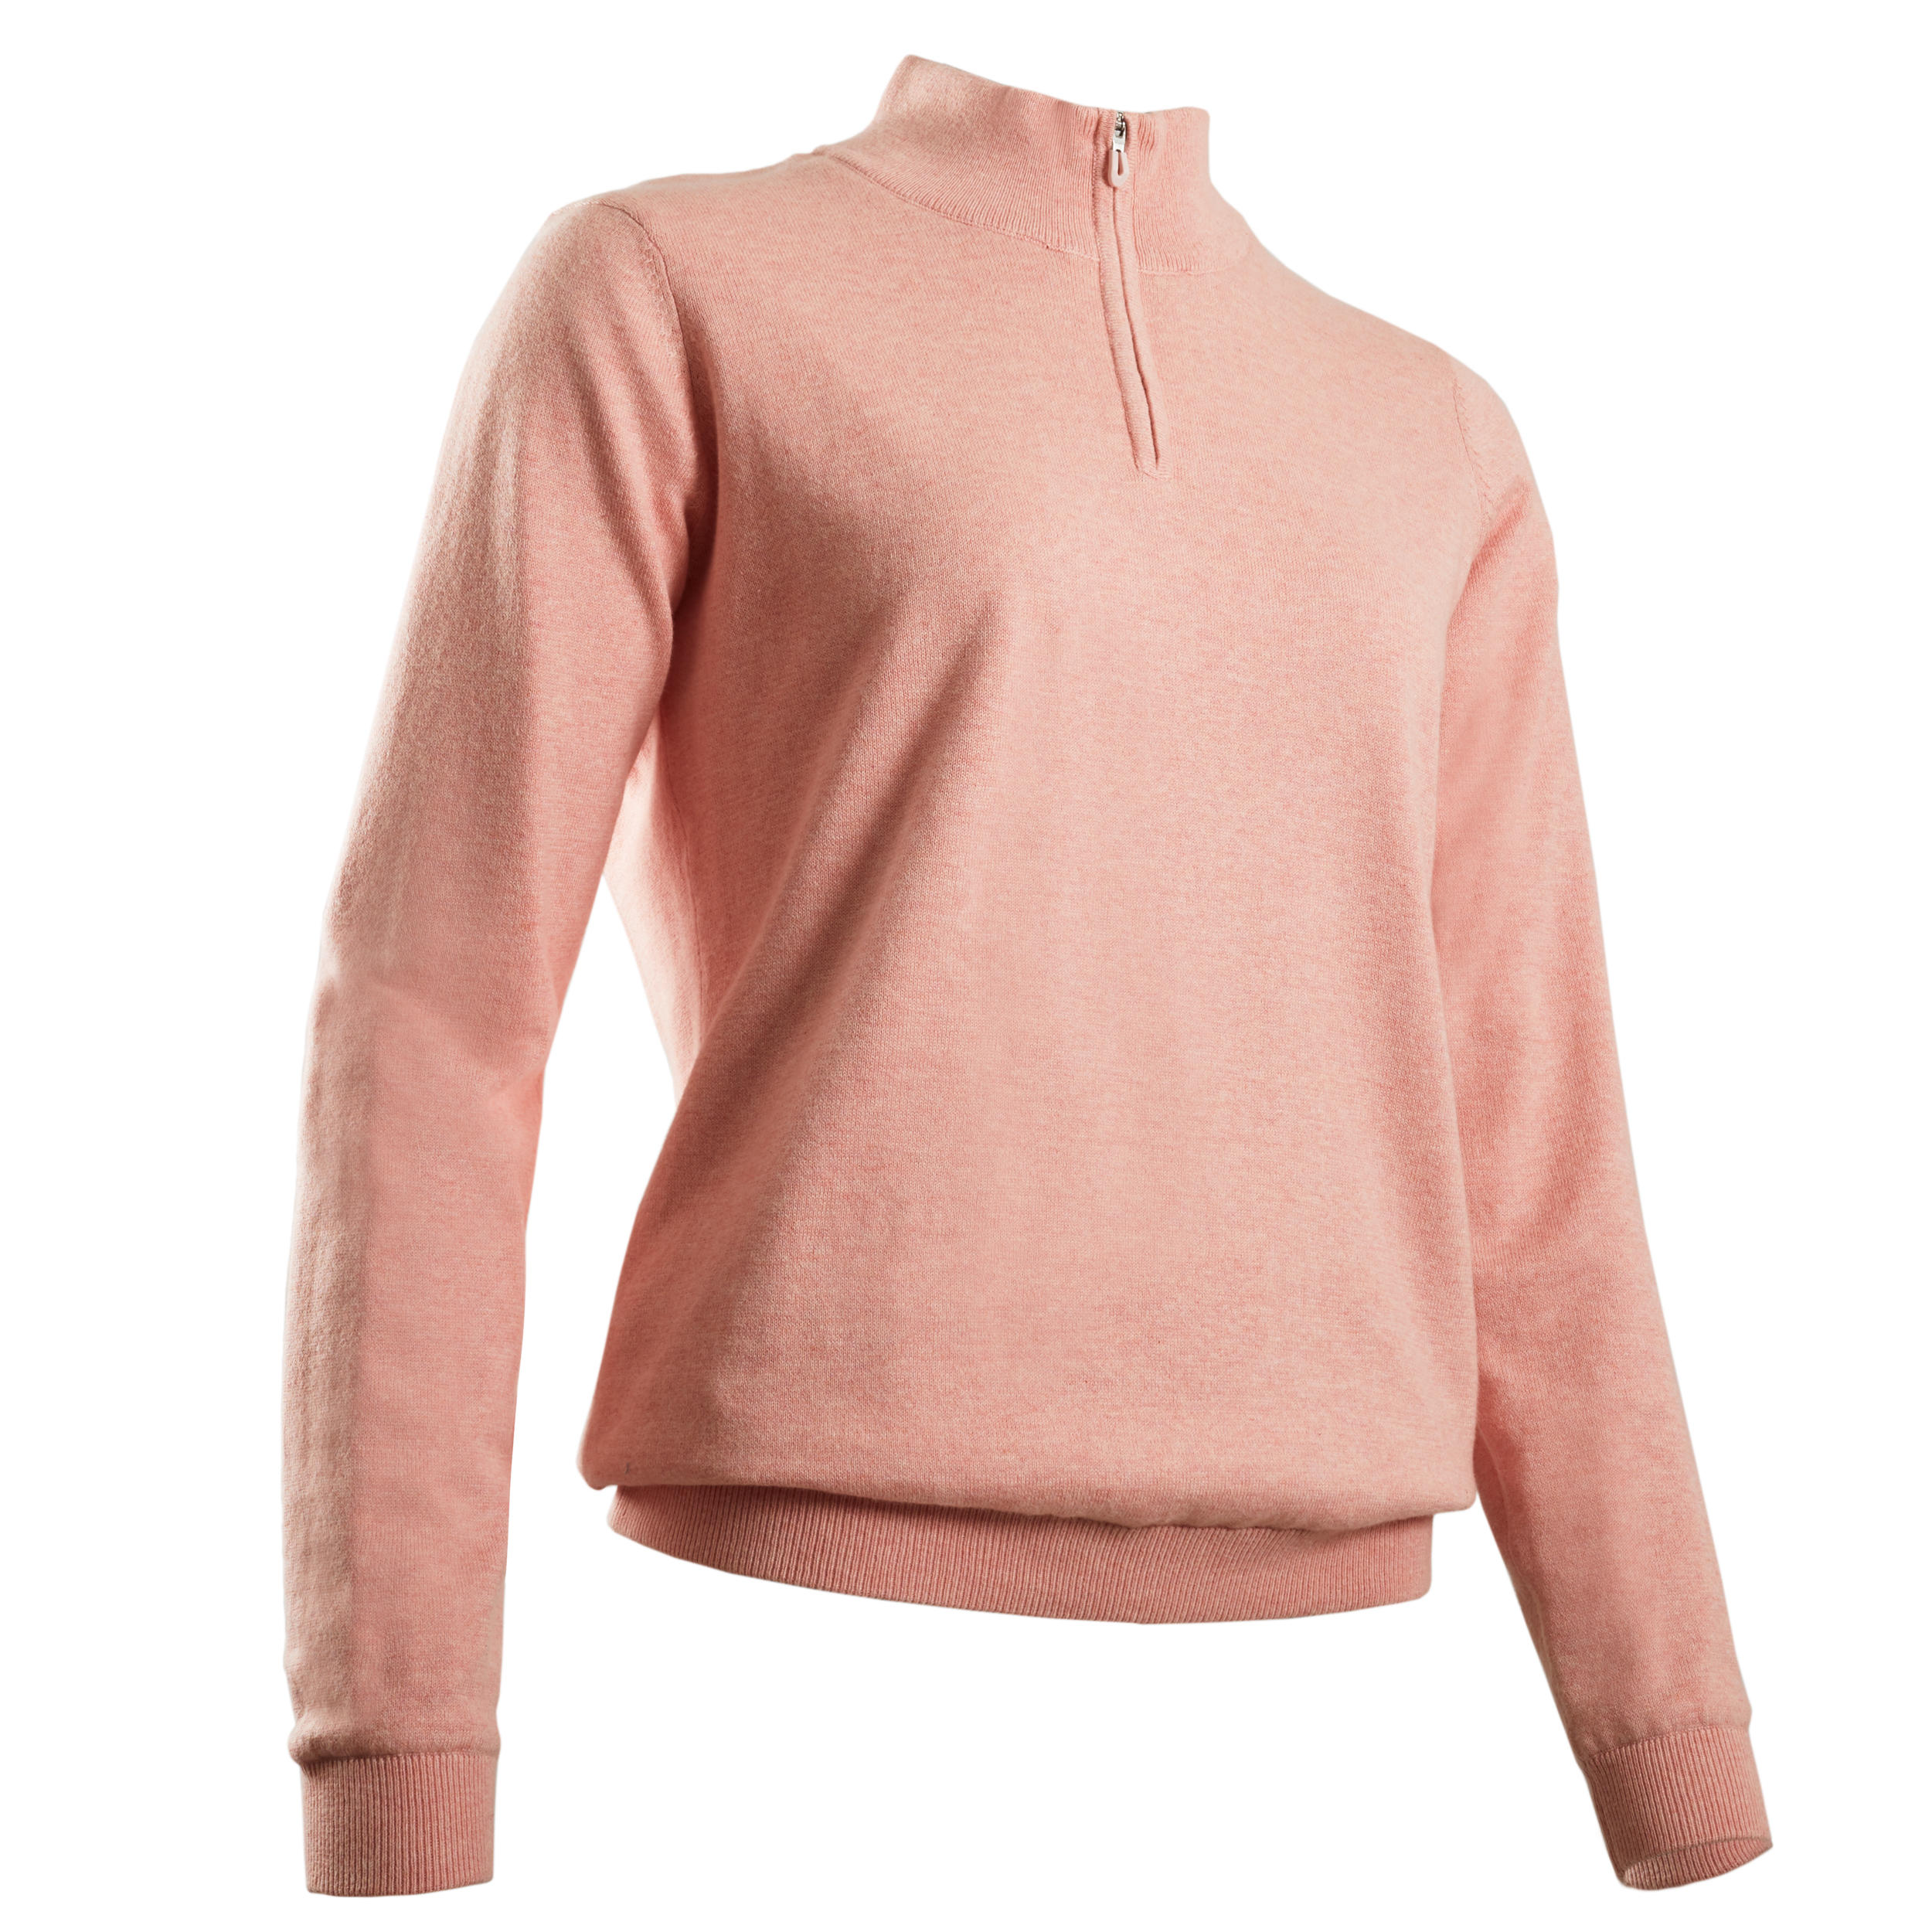 Women's golf windproof pullover MW500 pink 6/6